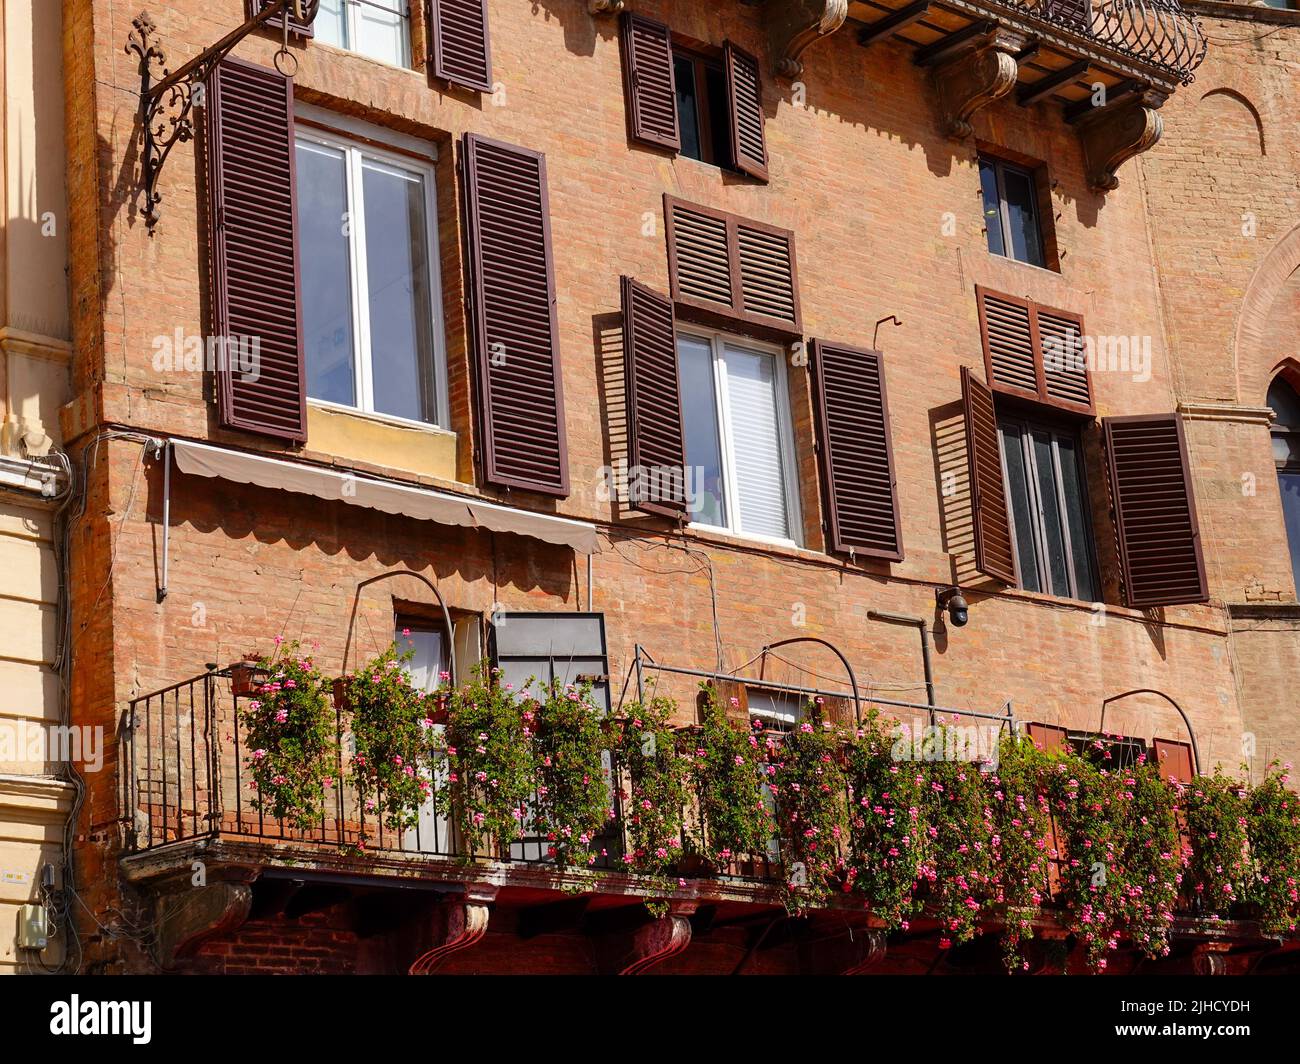 Cascading flowers down red brick facade on buildings in the Piazza del Campo, Siena, Italy, located in the heart of Tuscany. Stock Photo